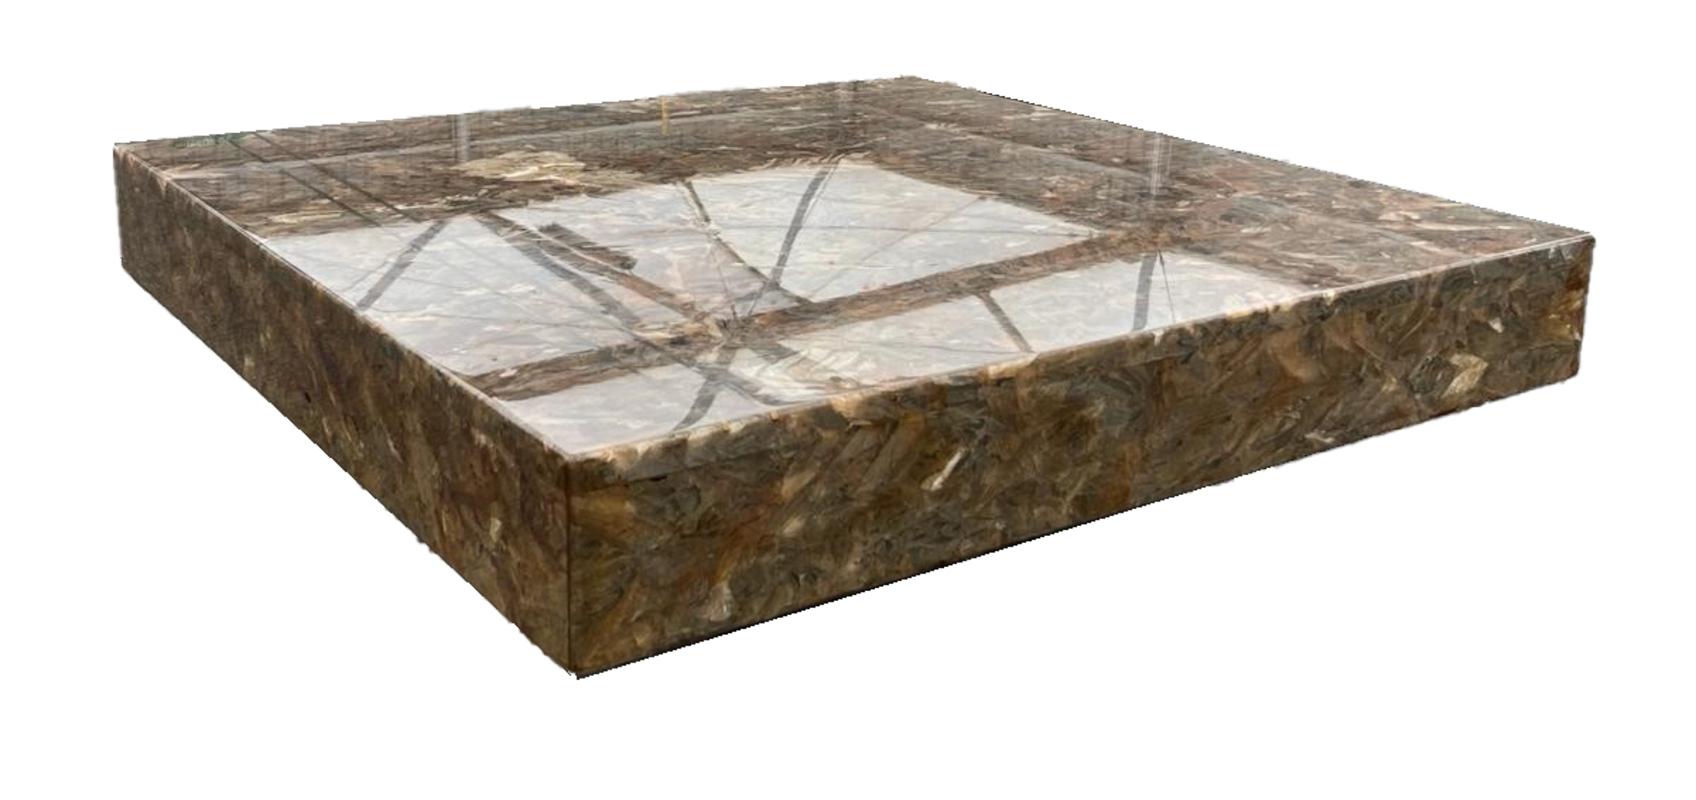 Coffee table in mica and beige resin in the style of Jean Charles, circa 1960s.
The top has an inlayed two brass crossbar and is entirely covered with resin. The base of the table is a mica and resin cube that gives the table a floating